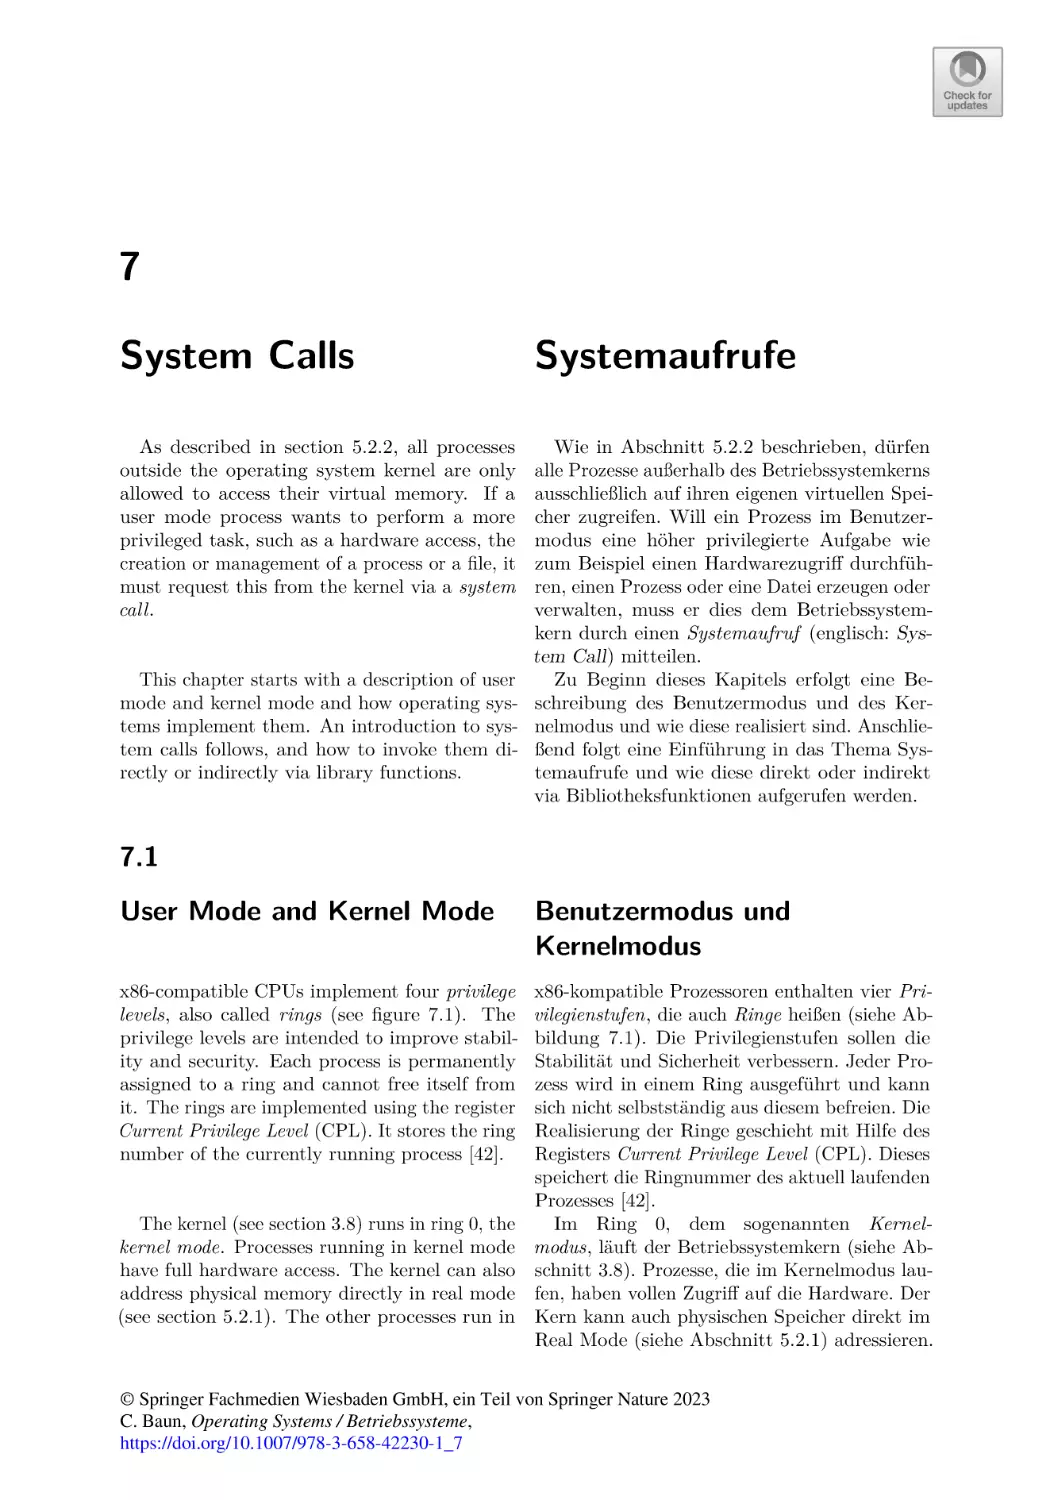 7
System Calls
7.1
User Mode and Kernel Mode